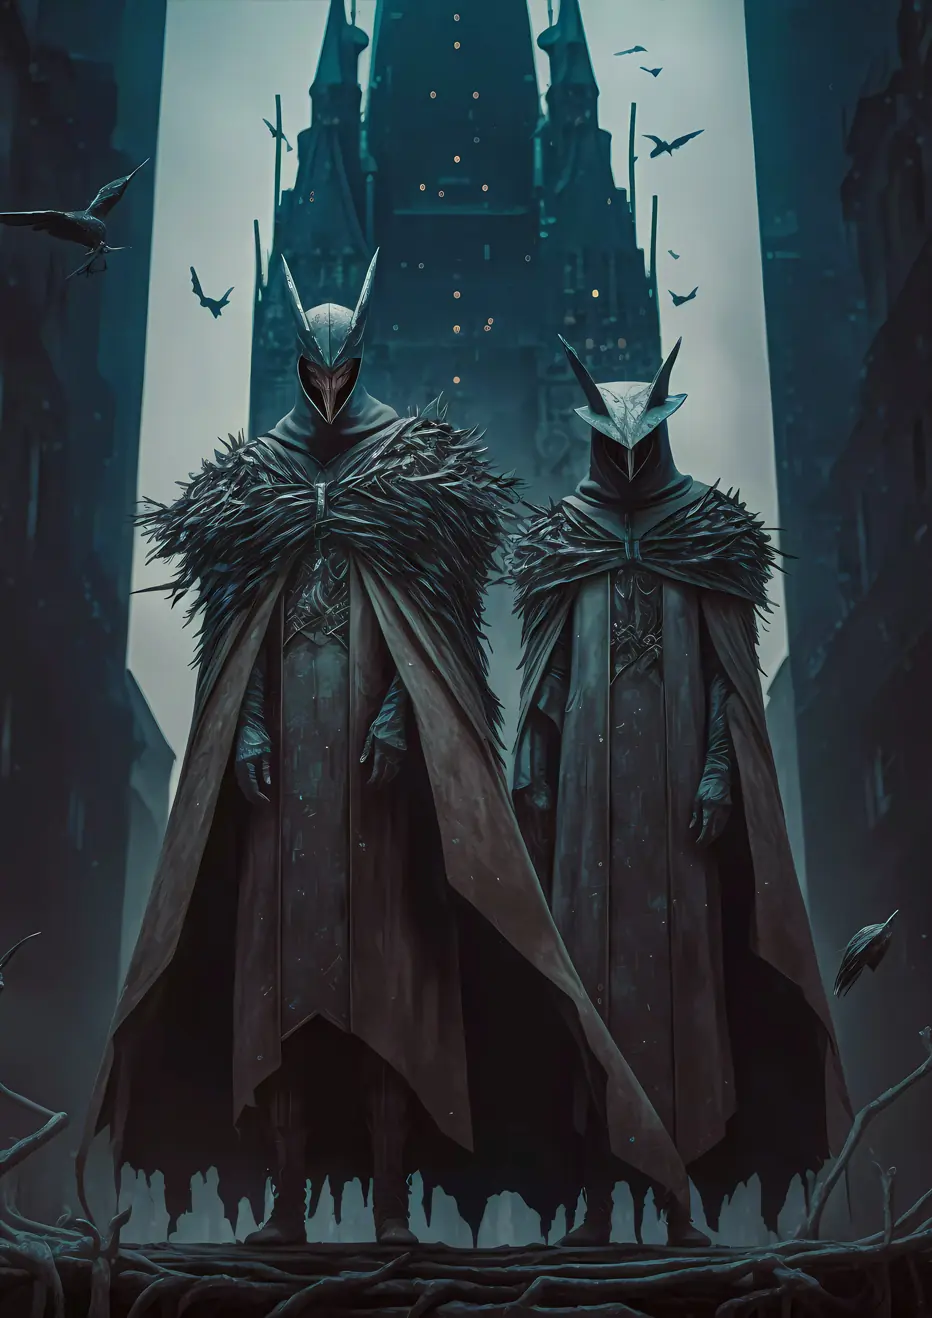 Grim Guardians - Dark cloaked figures with bird-like masks, guarding a city with a gothic castle in the background.